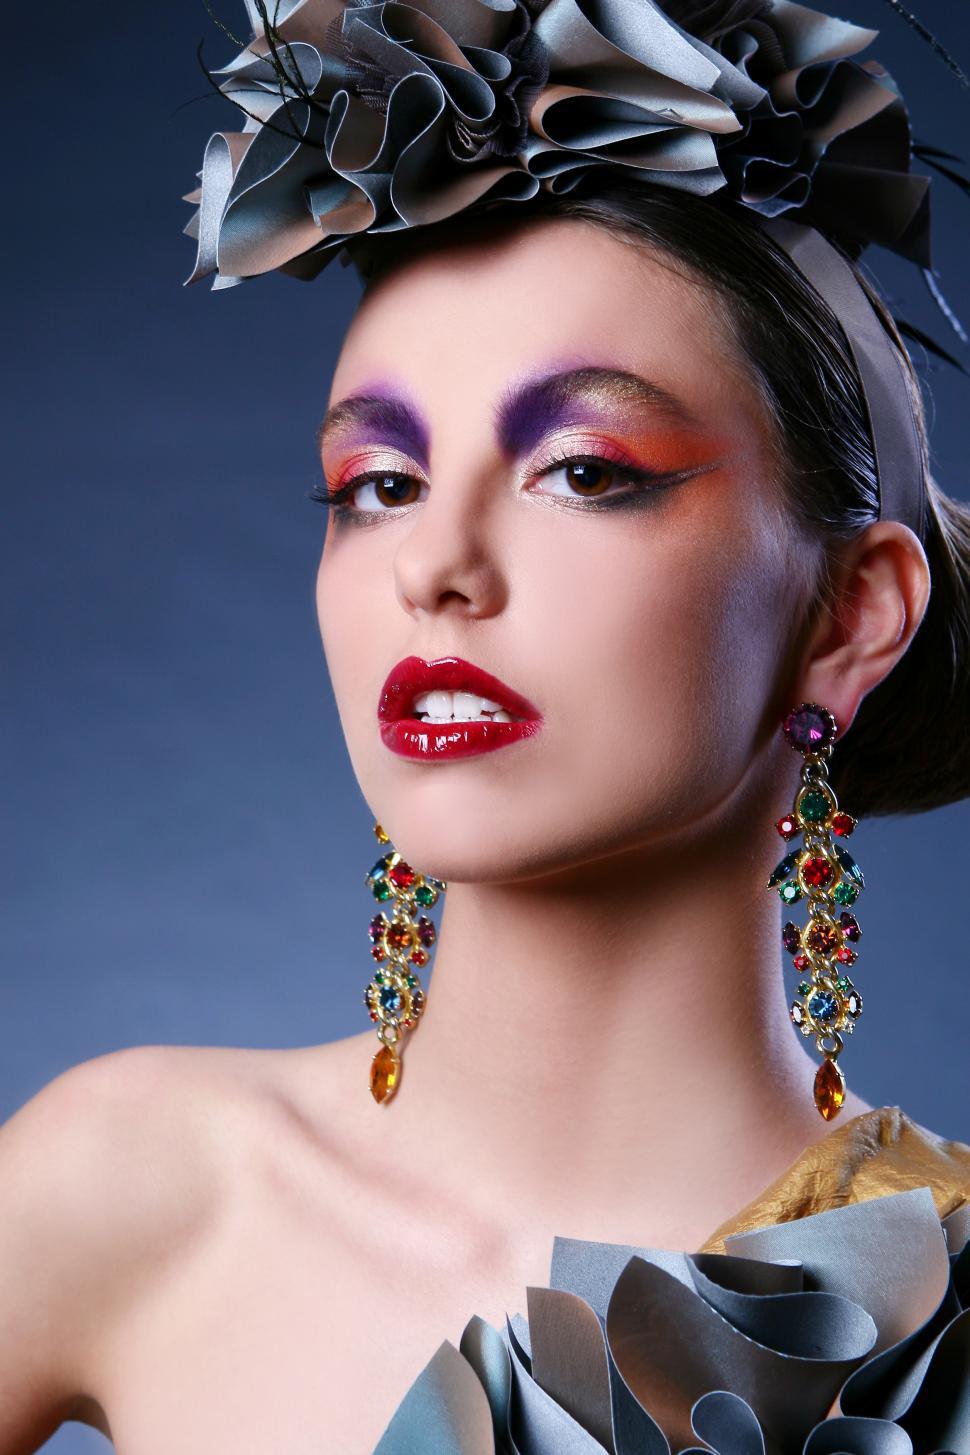 Free Image of Fashionable young woman in stylish makeup 